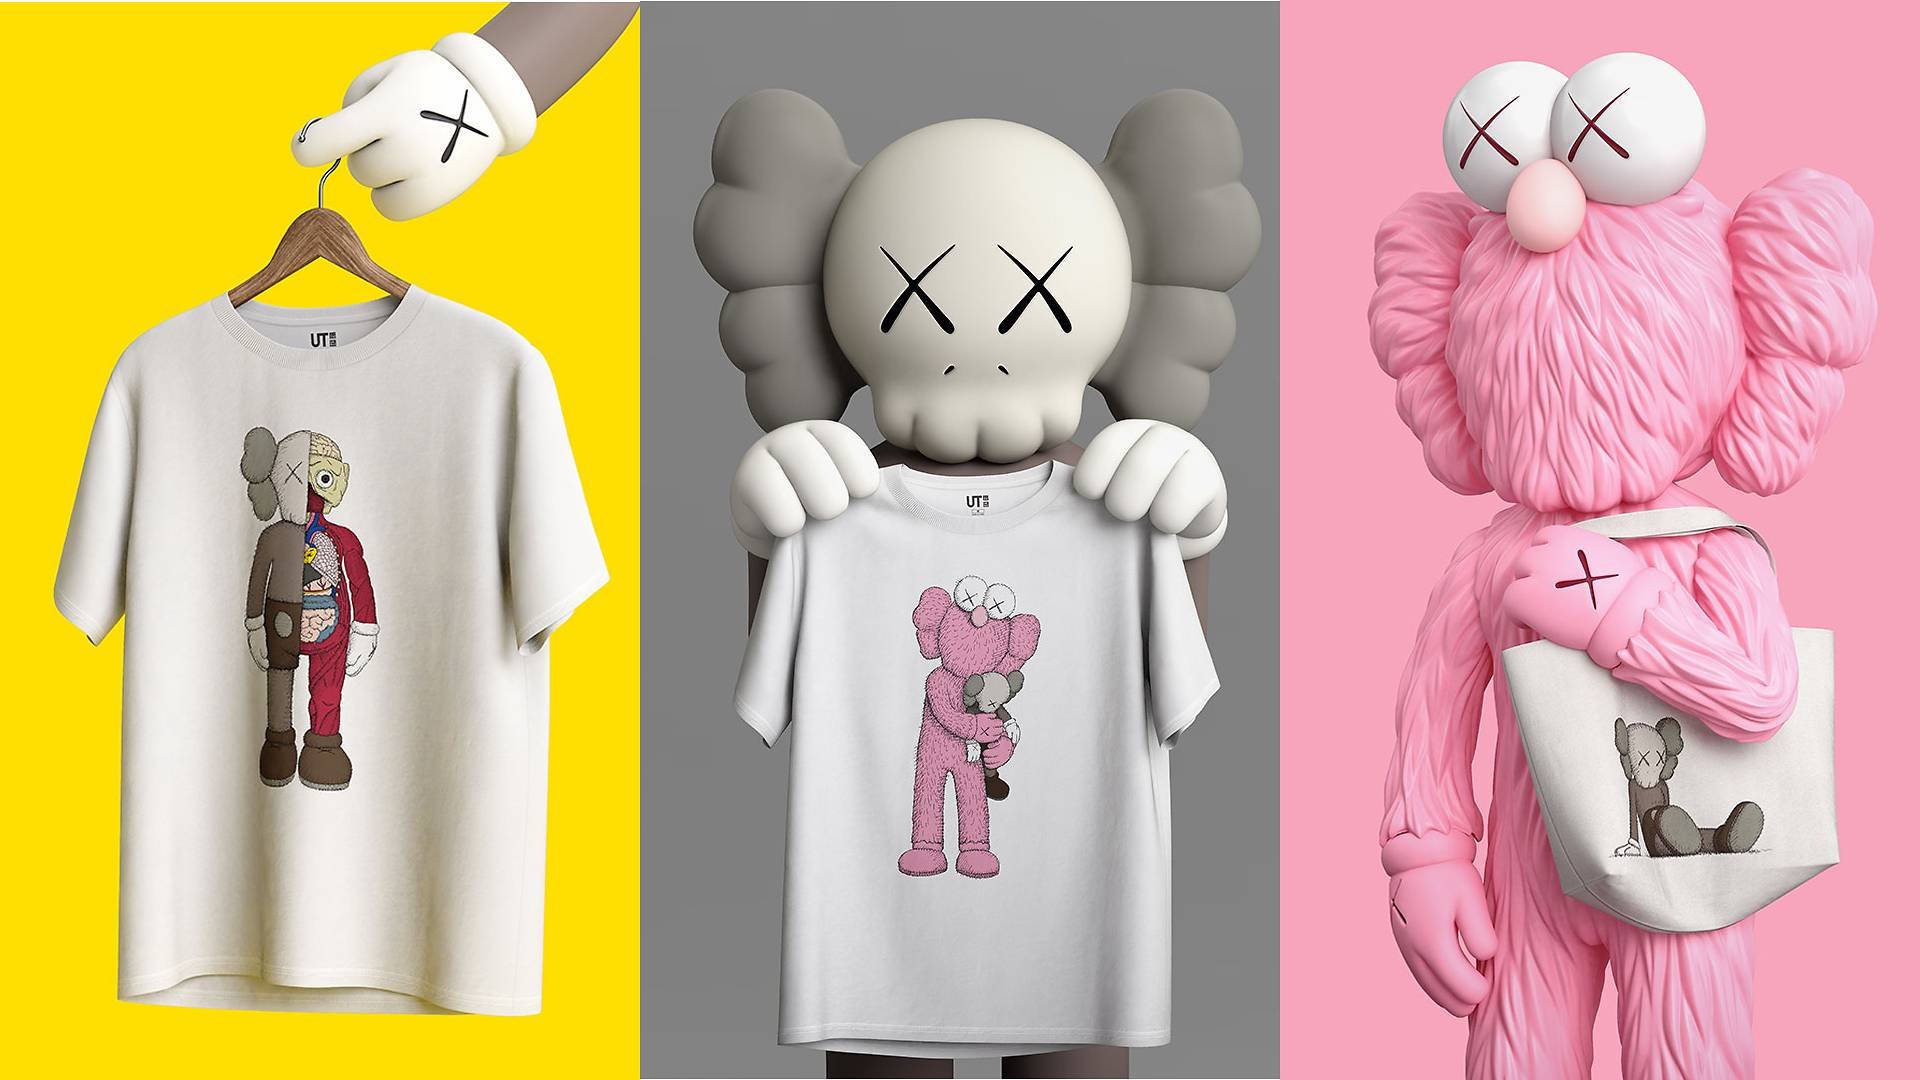 SEEING Pink With KAWS BFF  Kaws wallpaper Cool wallpapers cartoon  Doodle art designs